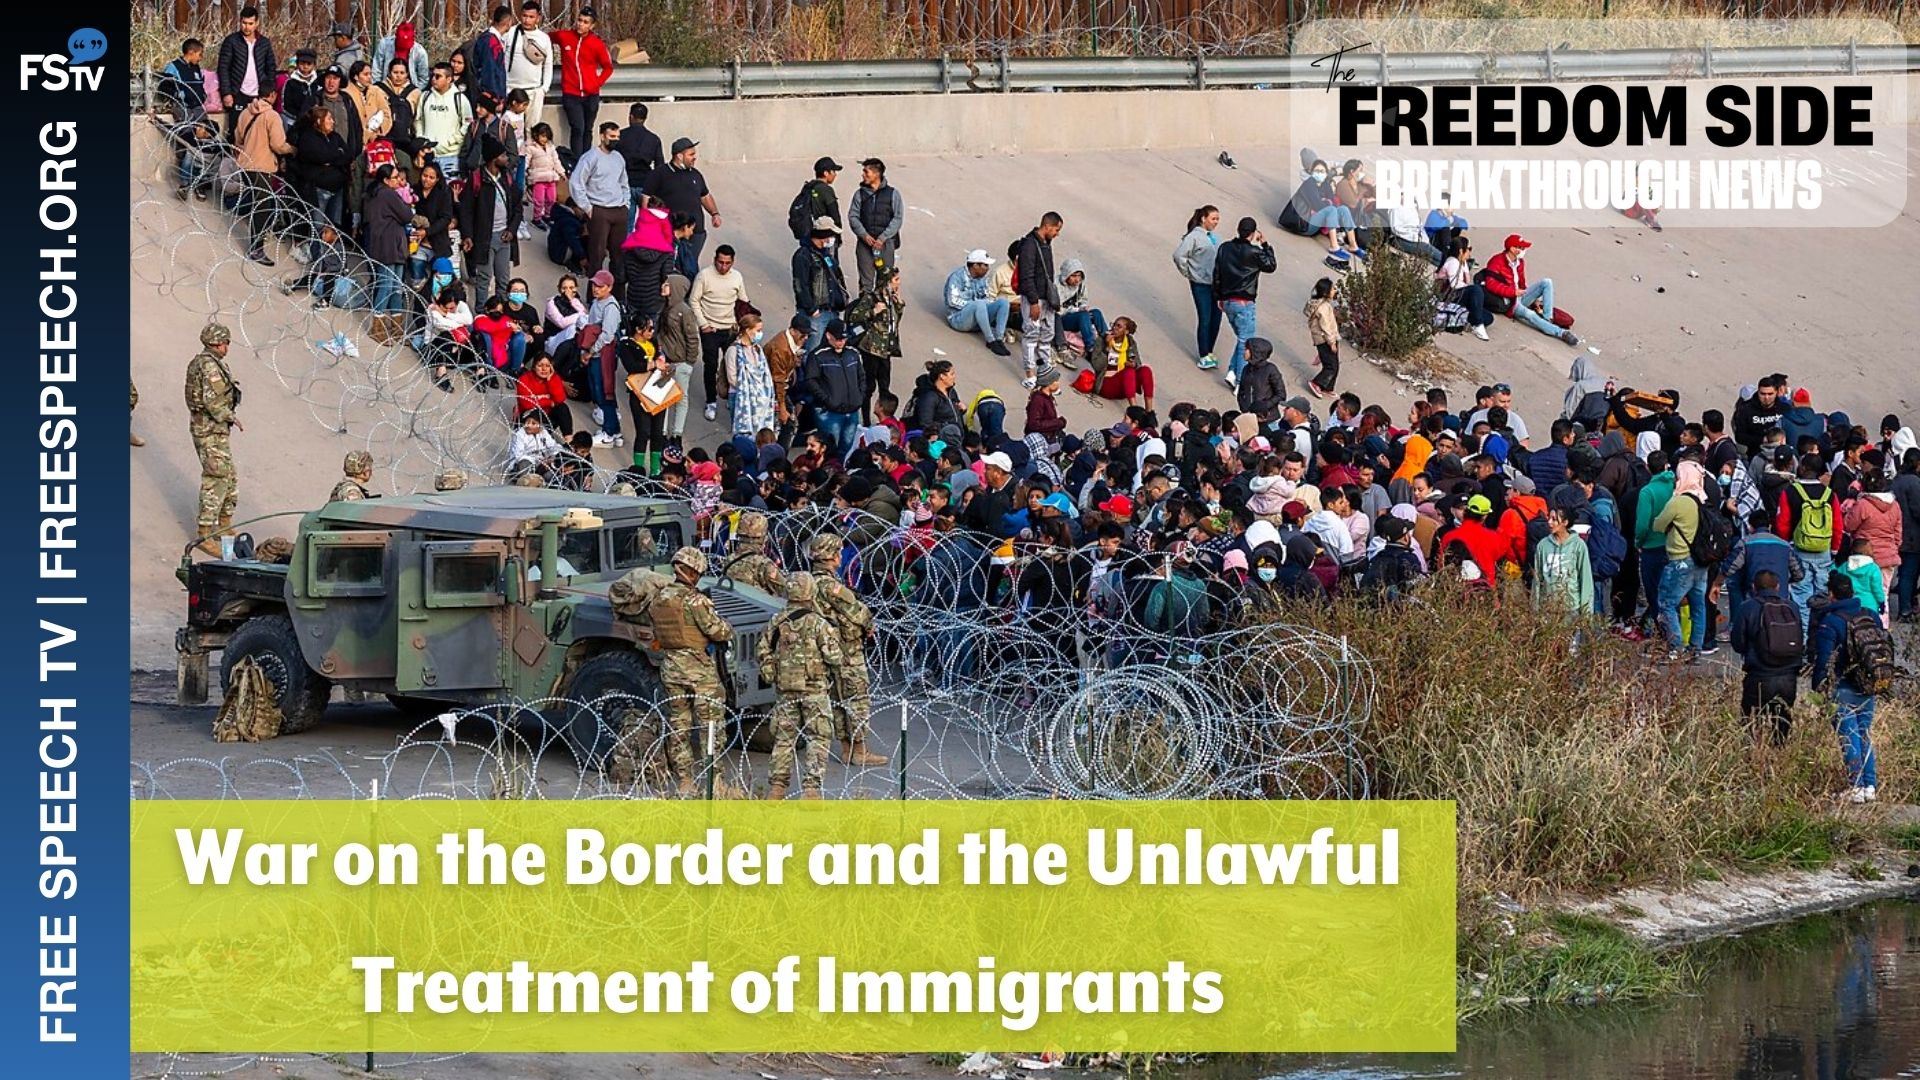 BreakThrough News | War on the Border and the Unlawful Treatment of Immigrants